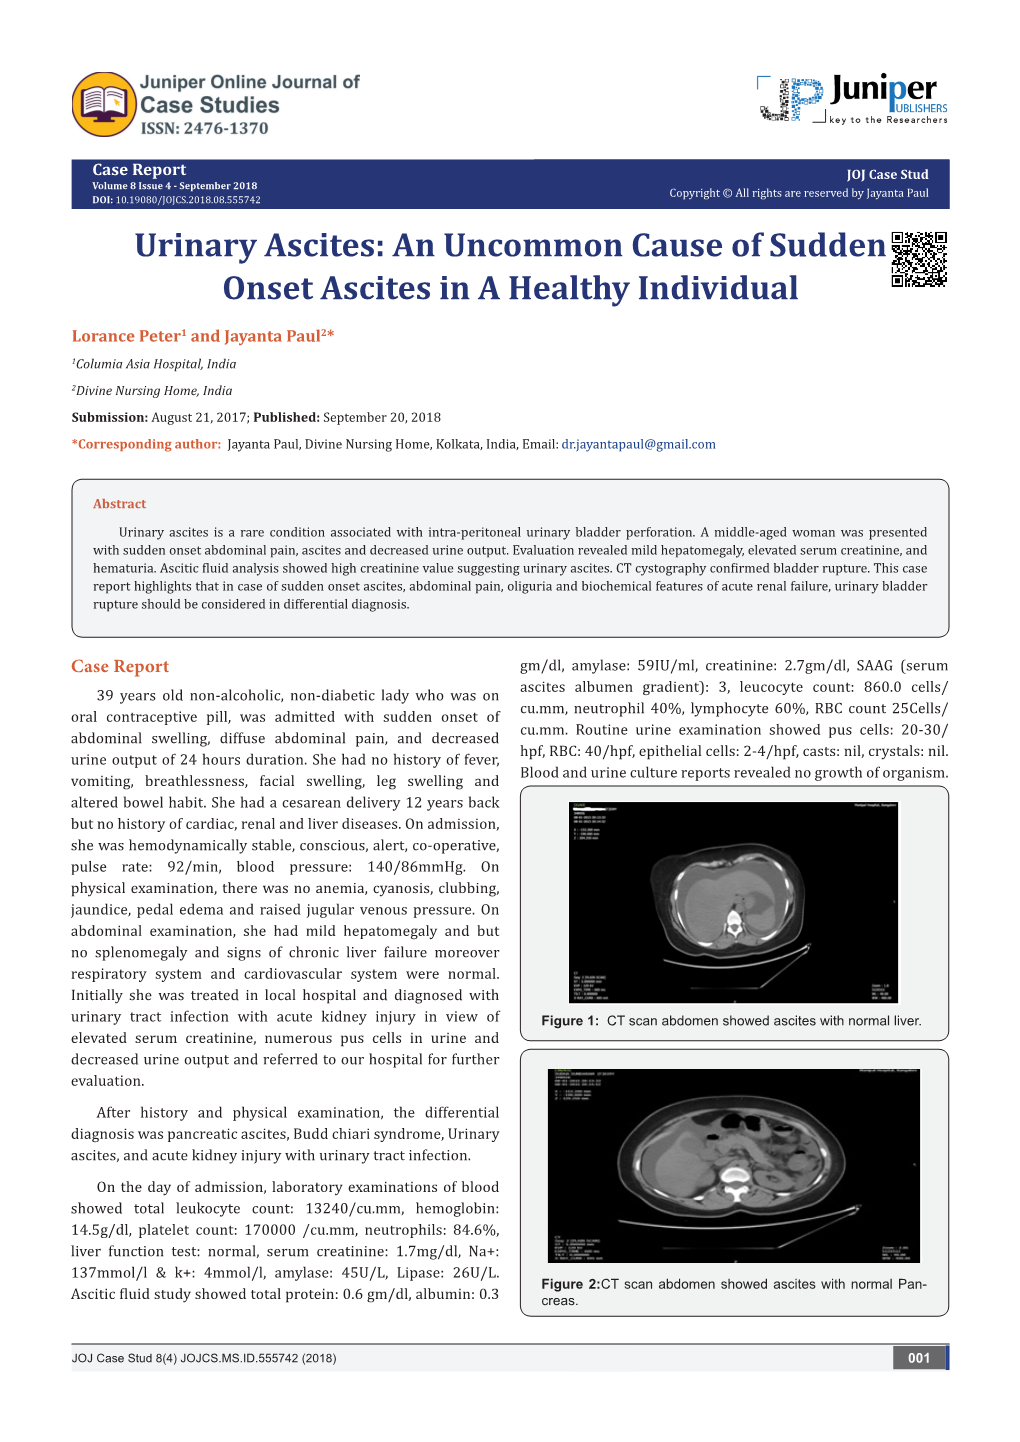 Urinary Ascites: an Uncommon Cause of Sudden Onset Ascites in a Healthy Individual